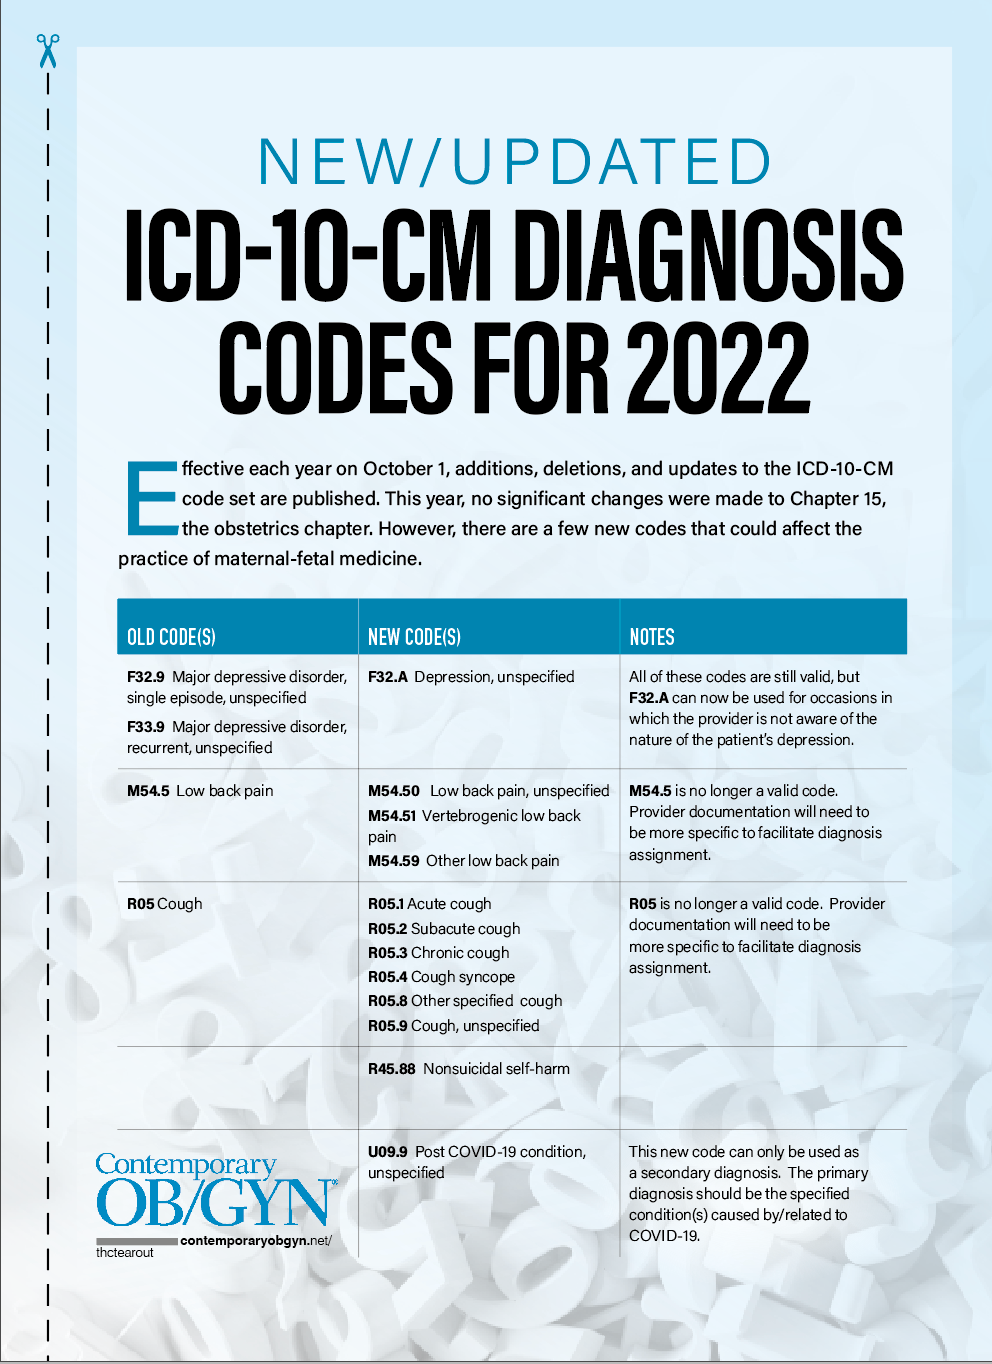 ICD-10-CM Diagnosis Codes for 2022